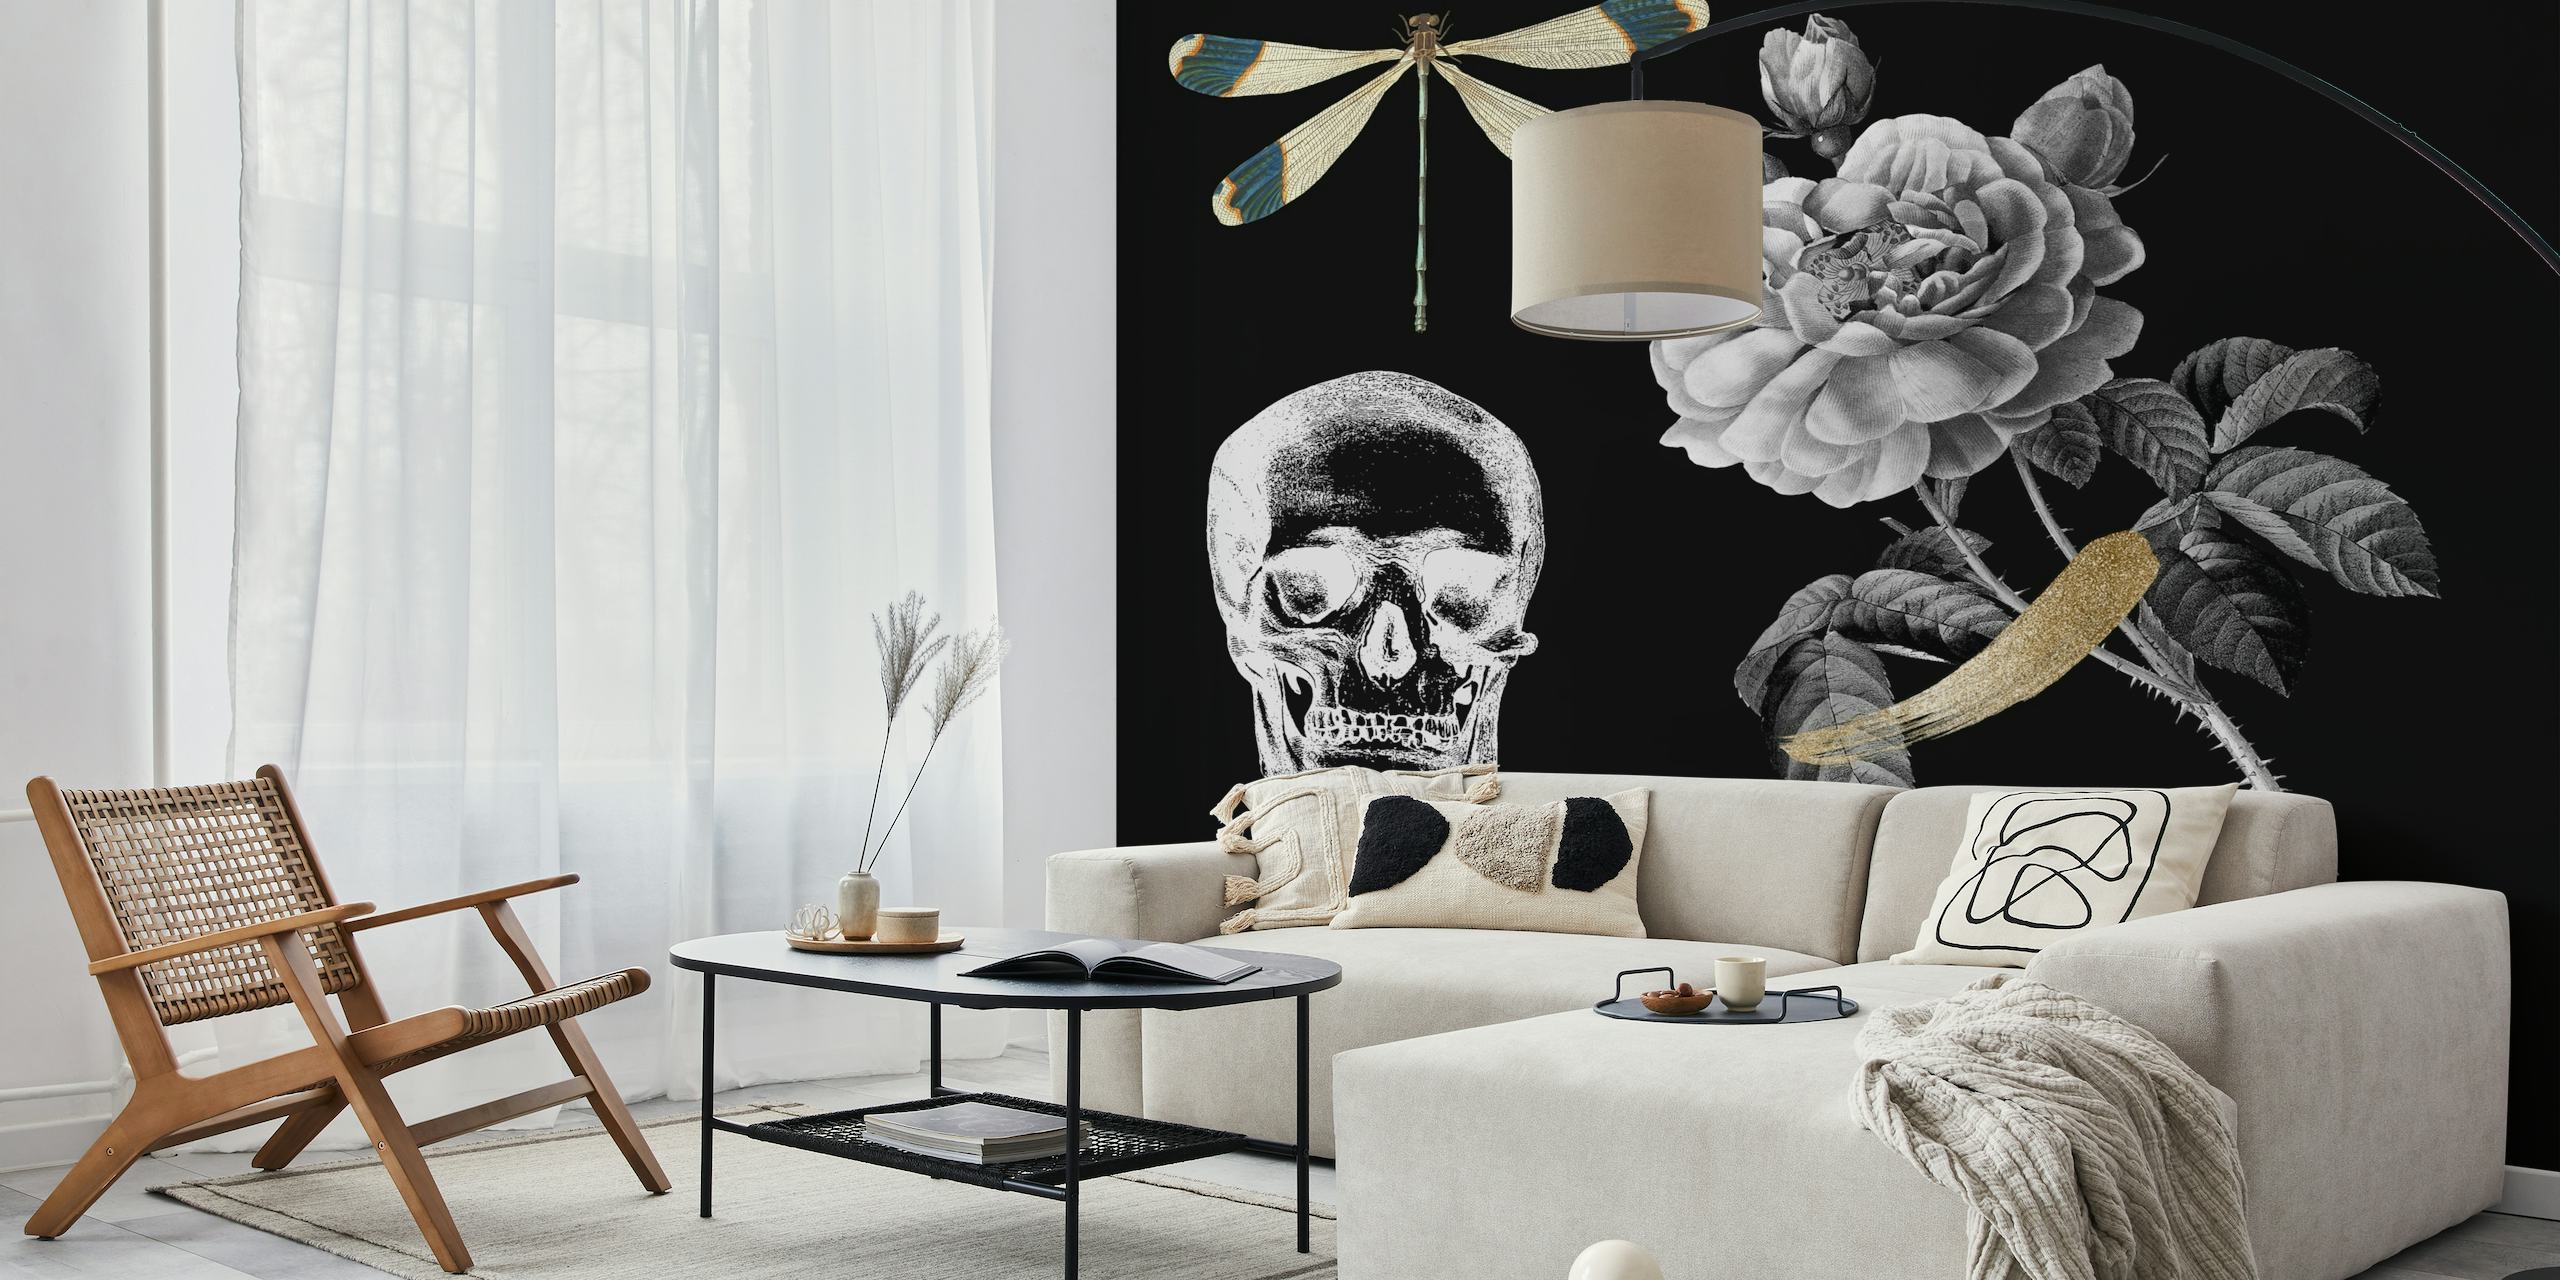 Cottage Core III wall mural with dragonfly, peony, and skull illustrations on black background